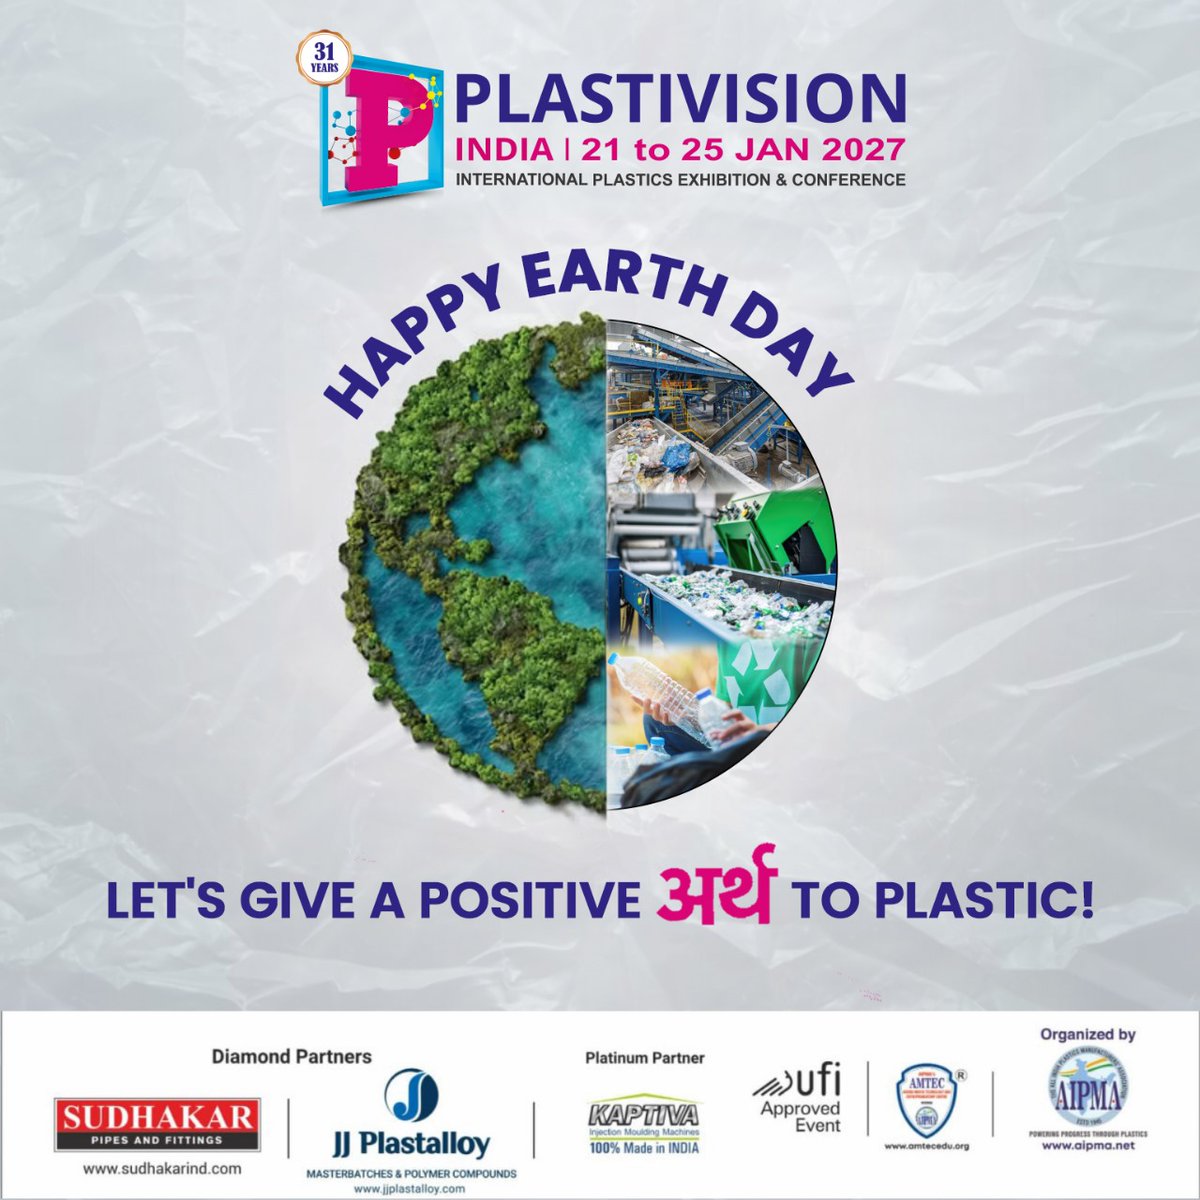 With proper recycling, plastics can be transformed into new products, closing the loop on waste. 🔄 

With lowest carbon footprint
It’s earths Best friend

Join Plastivision India in championing sustainable solutions for a greener Happy Earth Day!

#PlastivisionIndia #Earthday